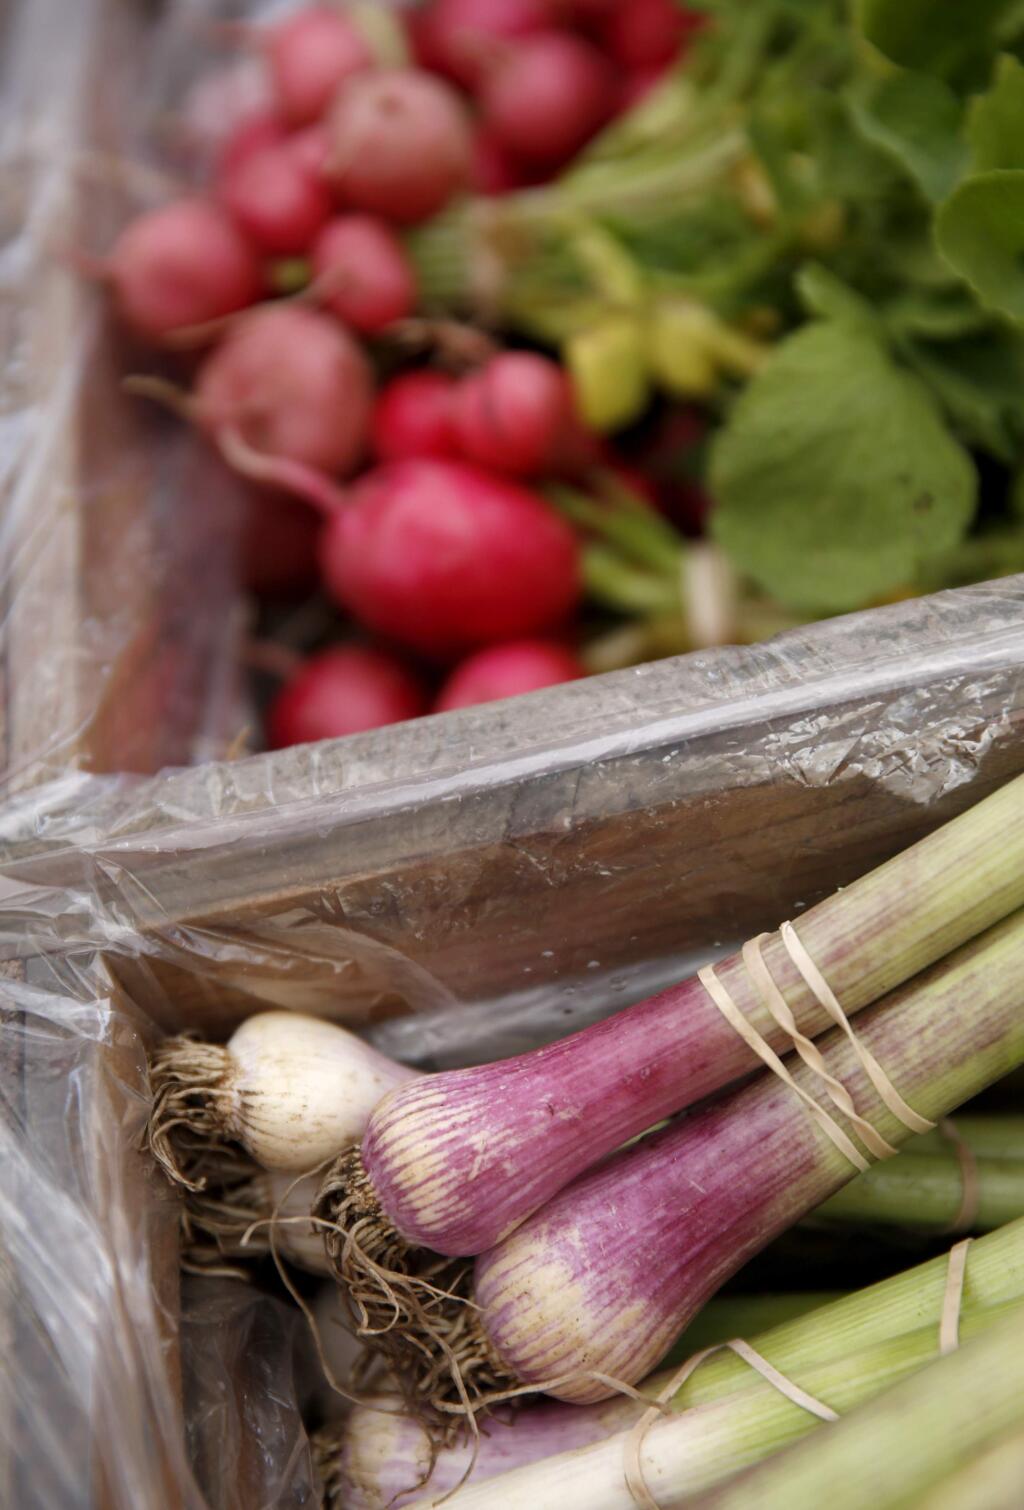 Onions and radishes sit for sale at the Petaluma East-Side Farmers Market at Lucchesi Park on Tuesday, April 28, 2015 in Petaluma, California . (BETH SCHLANKER/ The Press Democrat)